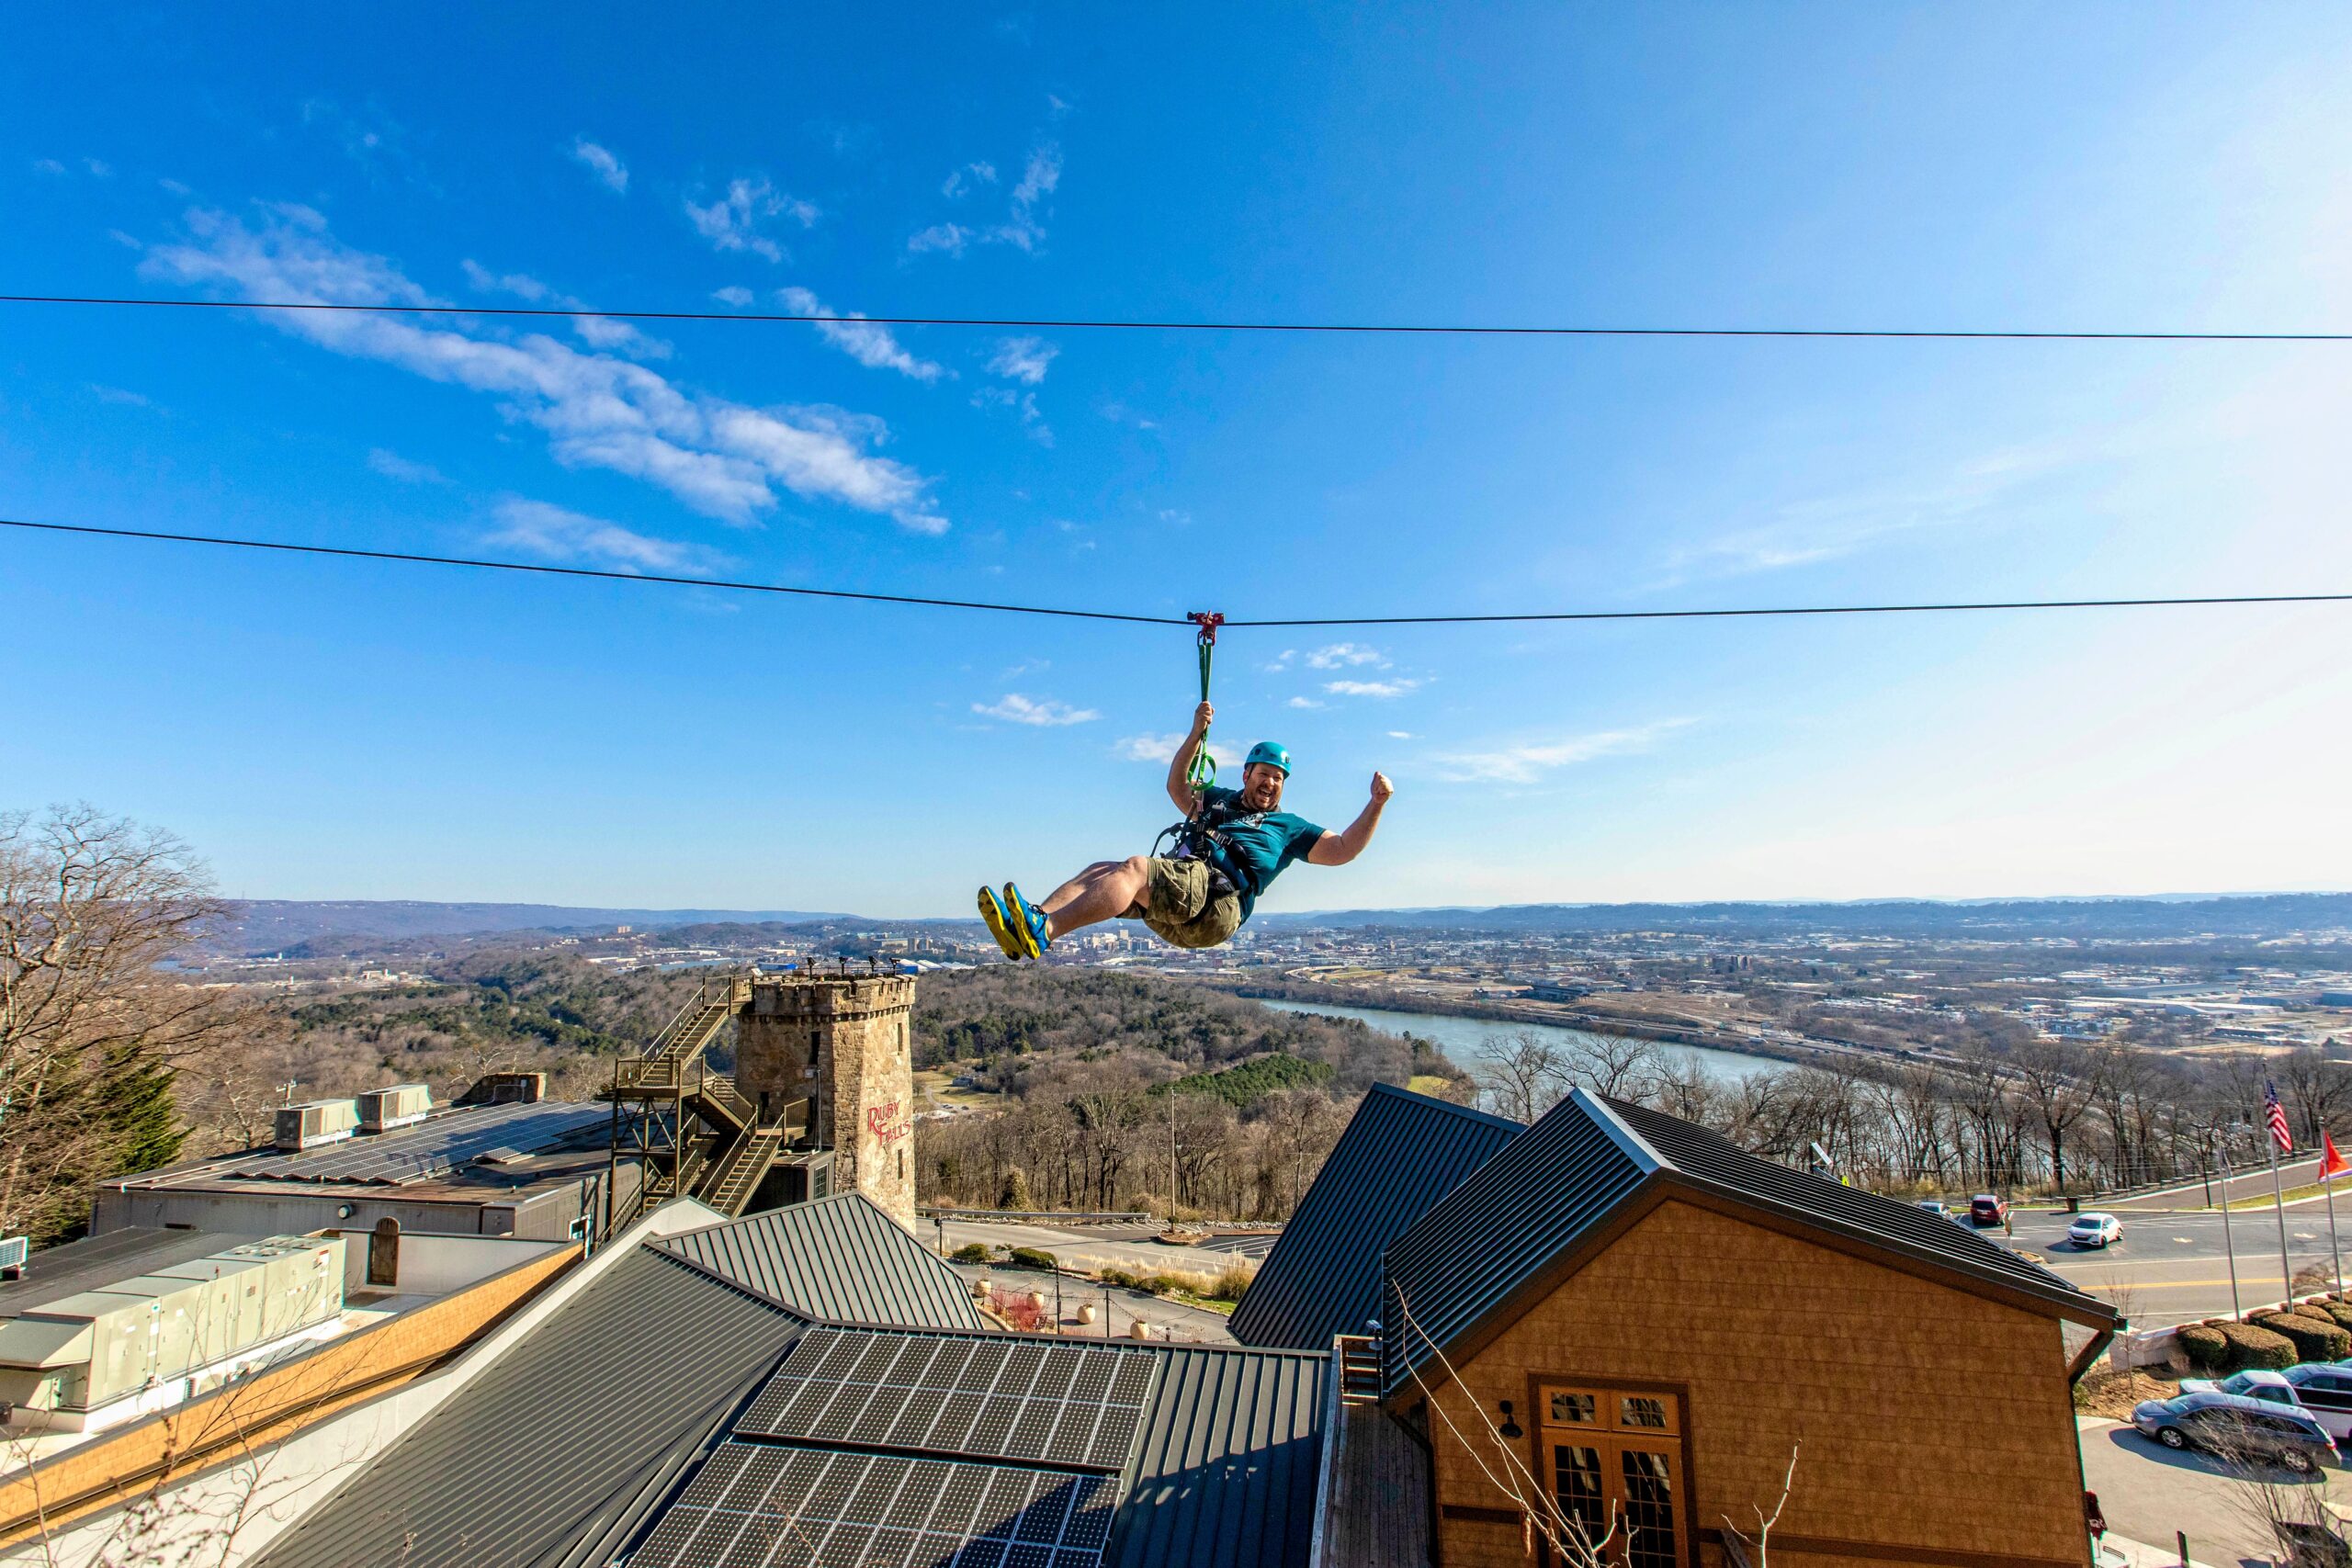 A man enthusiastically rides the zip line and raises a fist in excitement